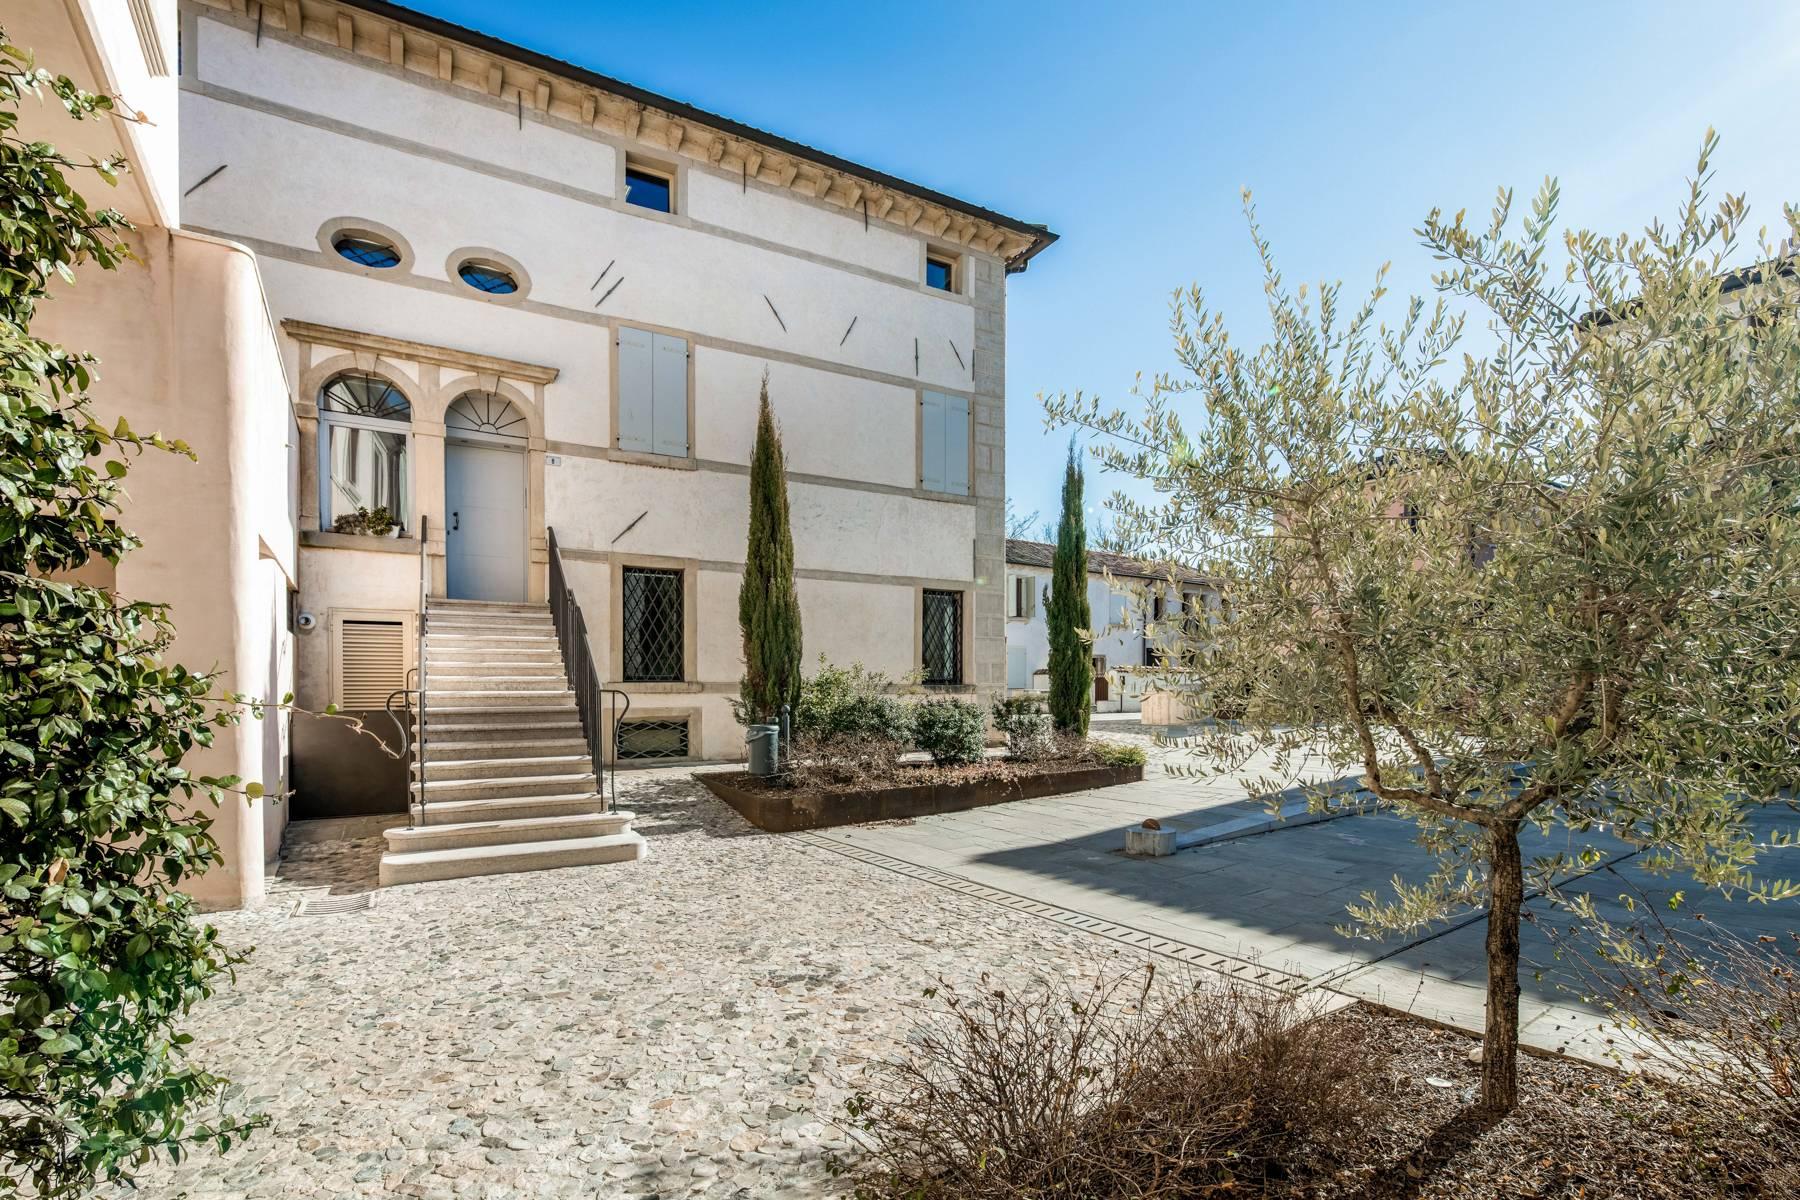 Luxurious penthouse on a 17th century Venetian Villa completely renovated - 24